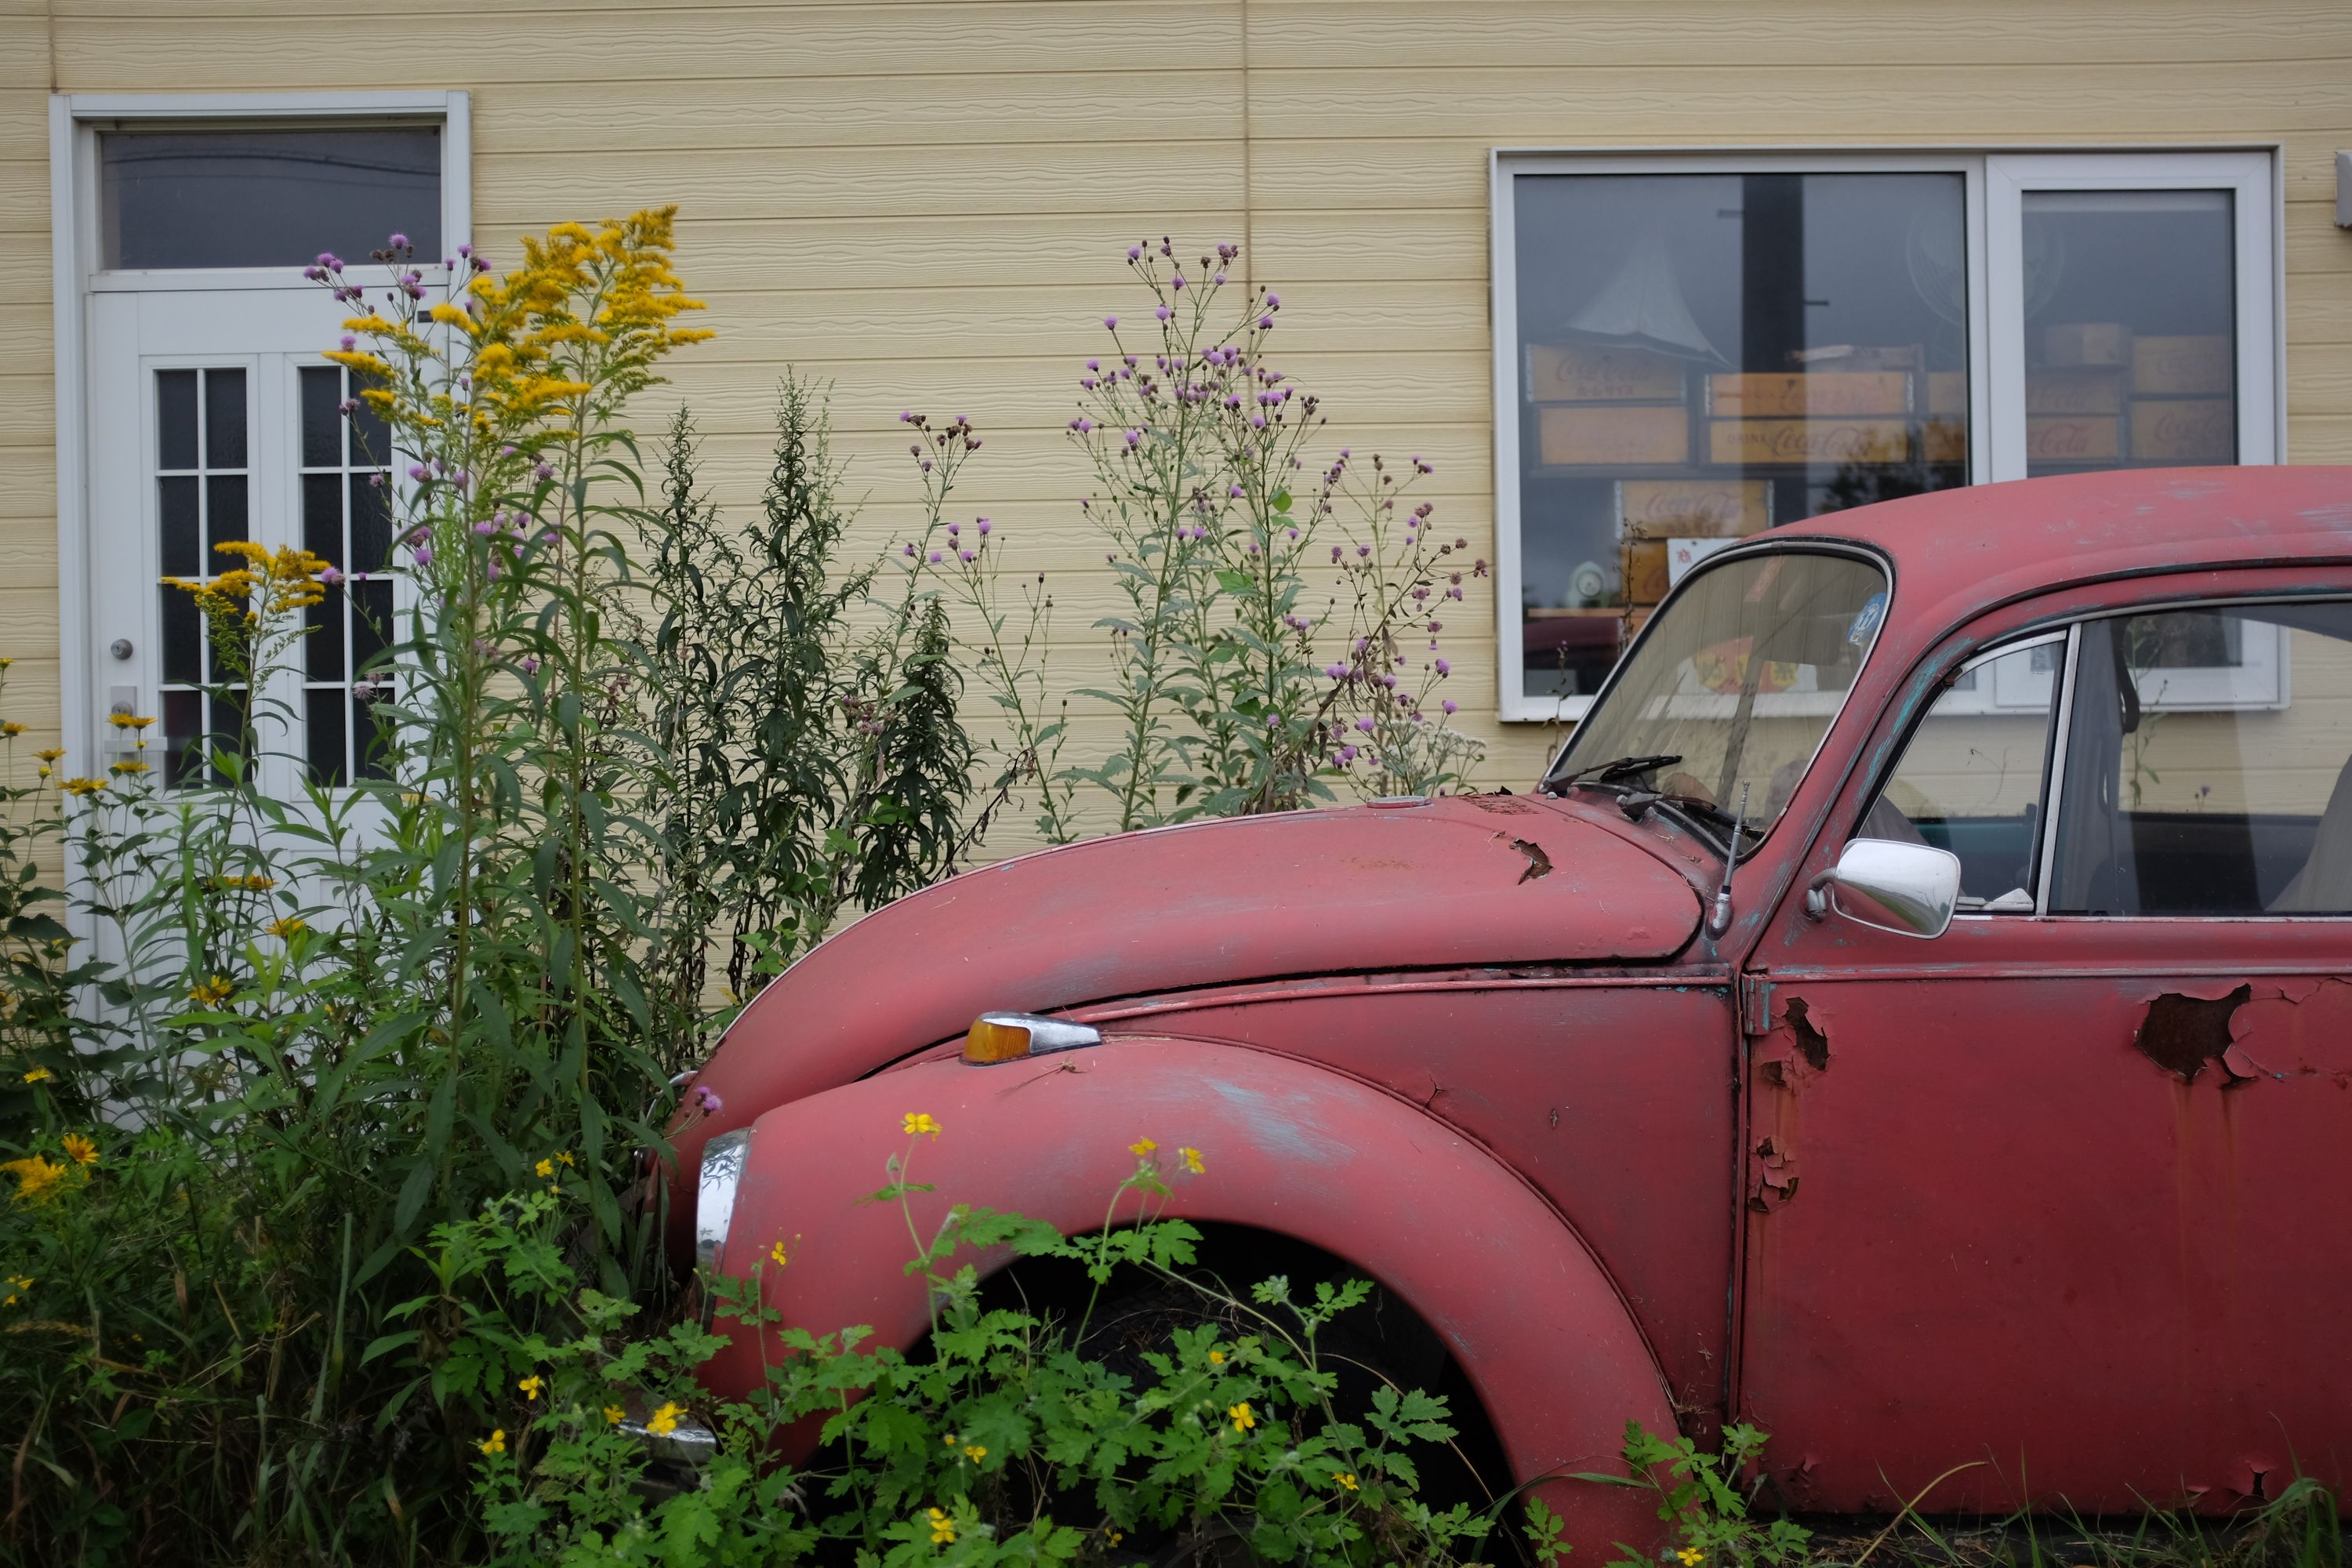 A rusty, faded red Volkswagen Beetle in the tall grass by a house.